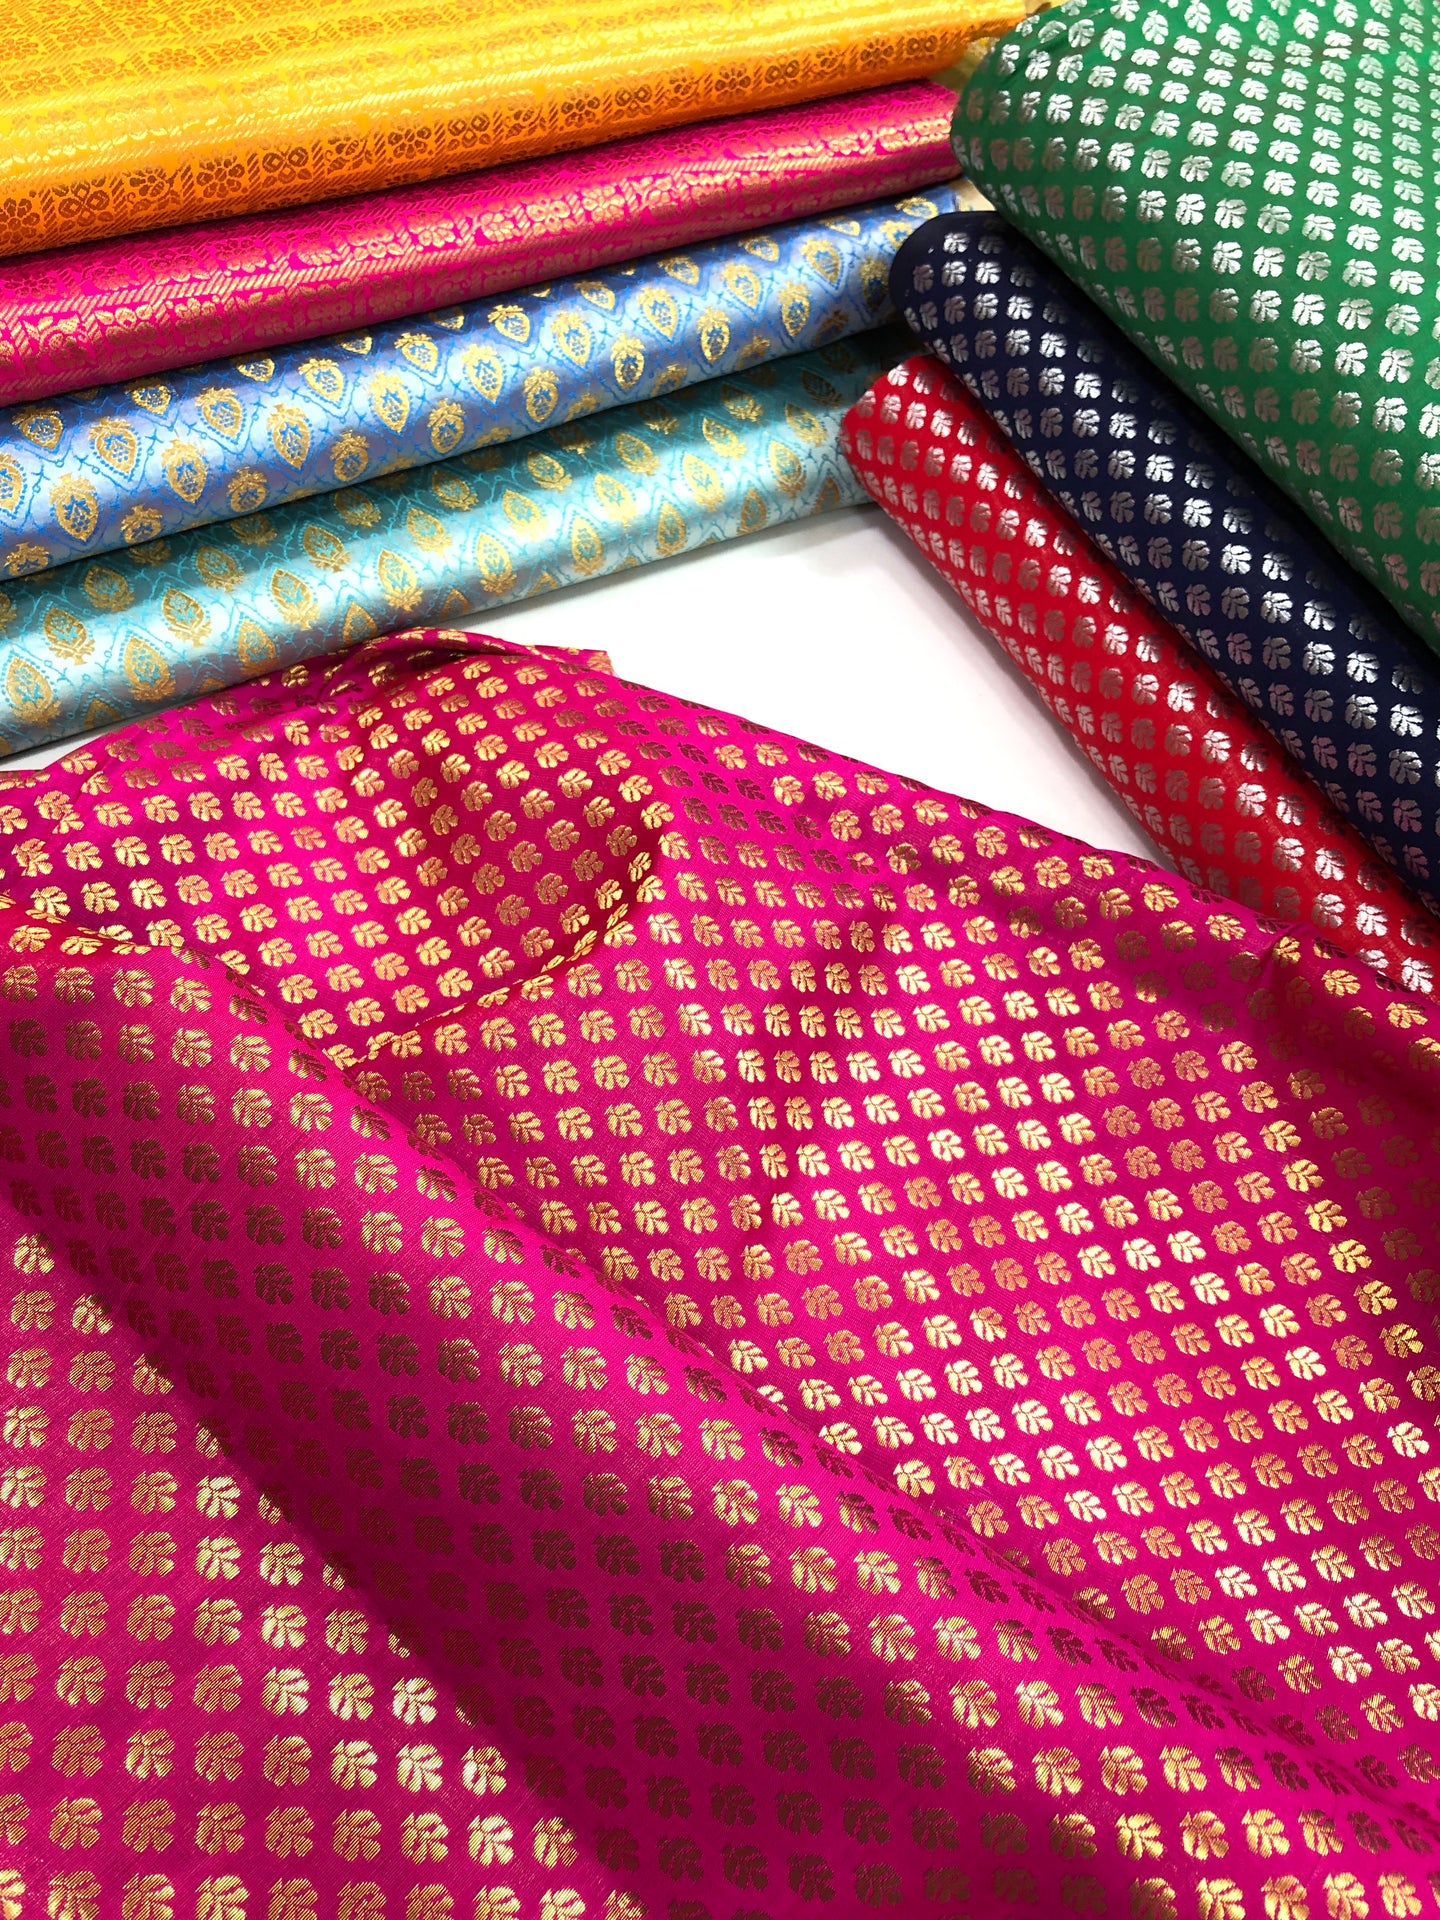 Brocade and Woven fabric